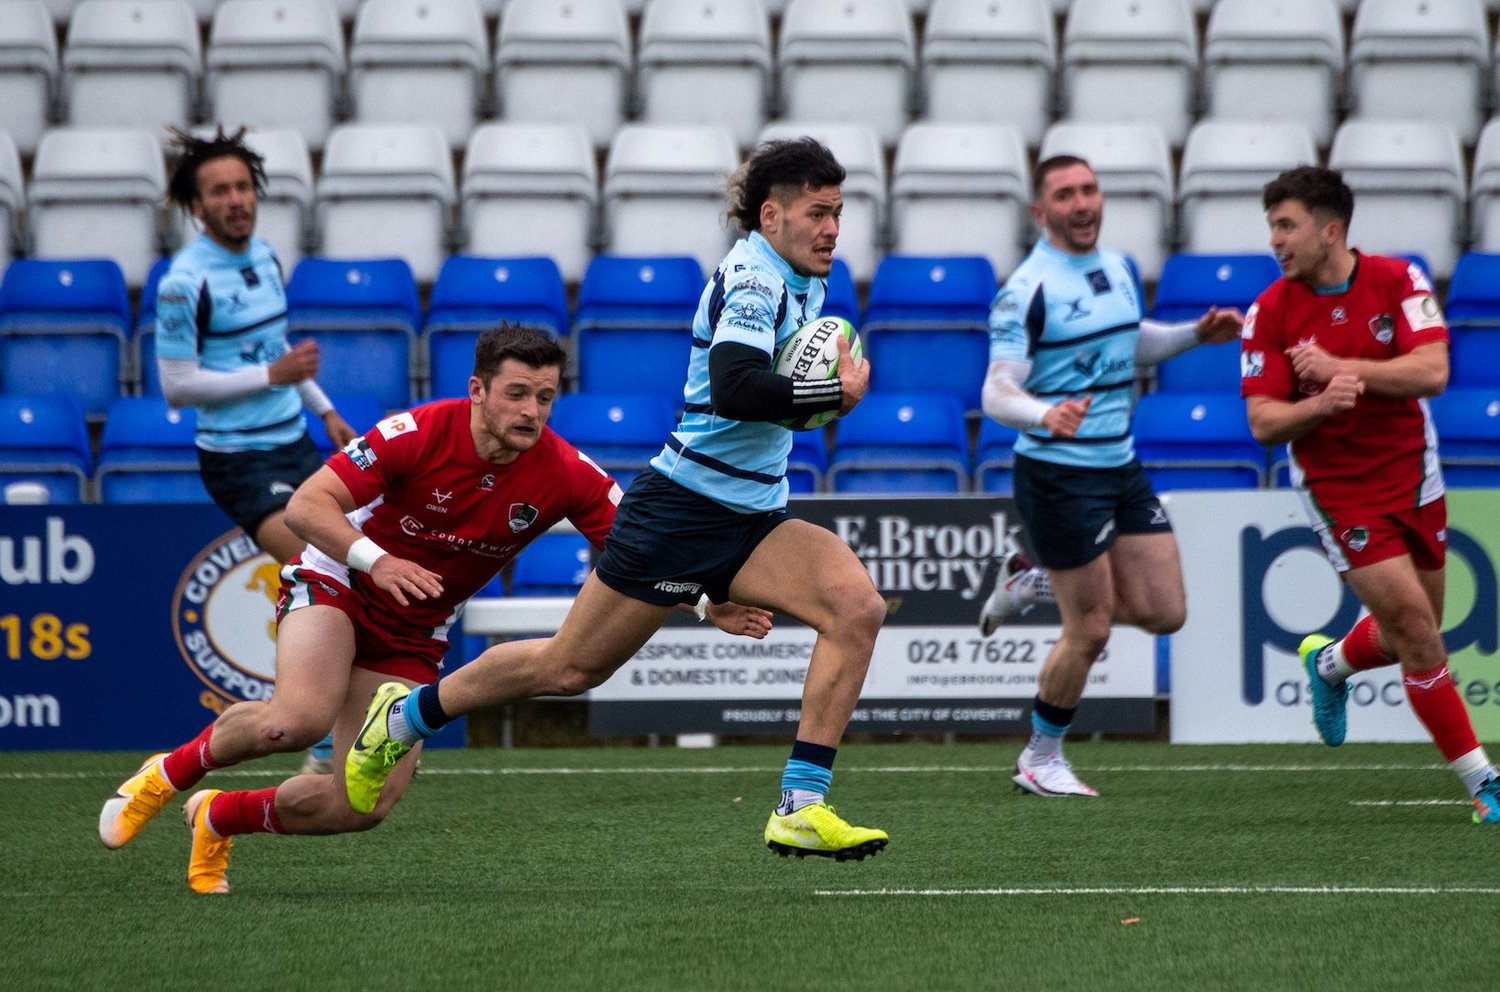 Connor Tupai from Northampton Saints breaks through for Bedford Blues